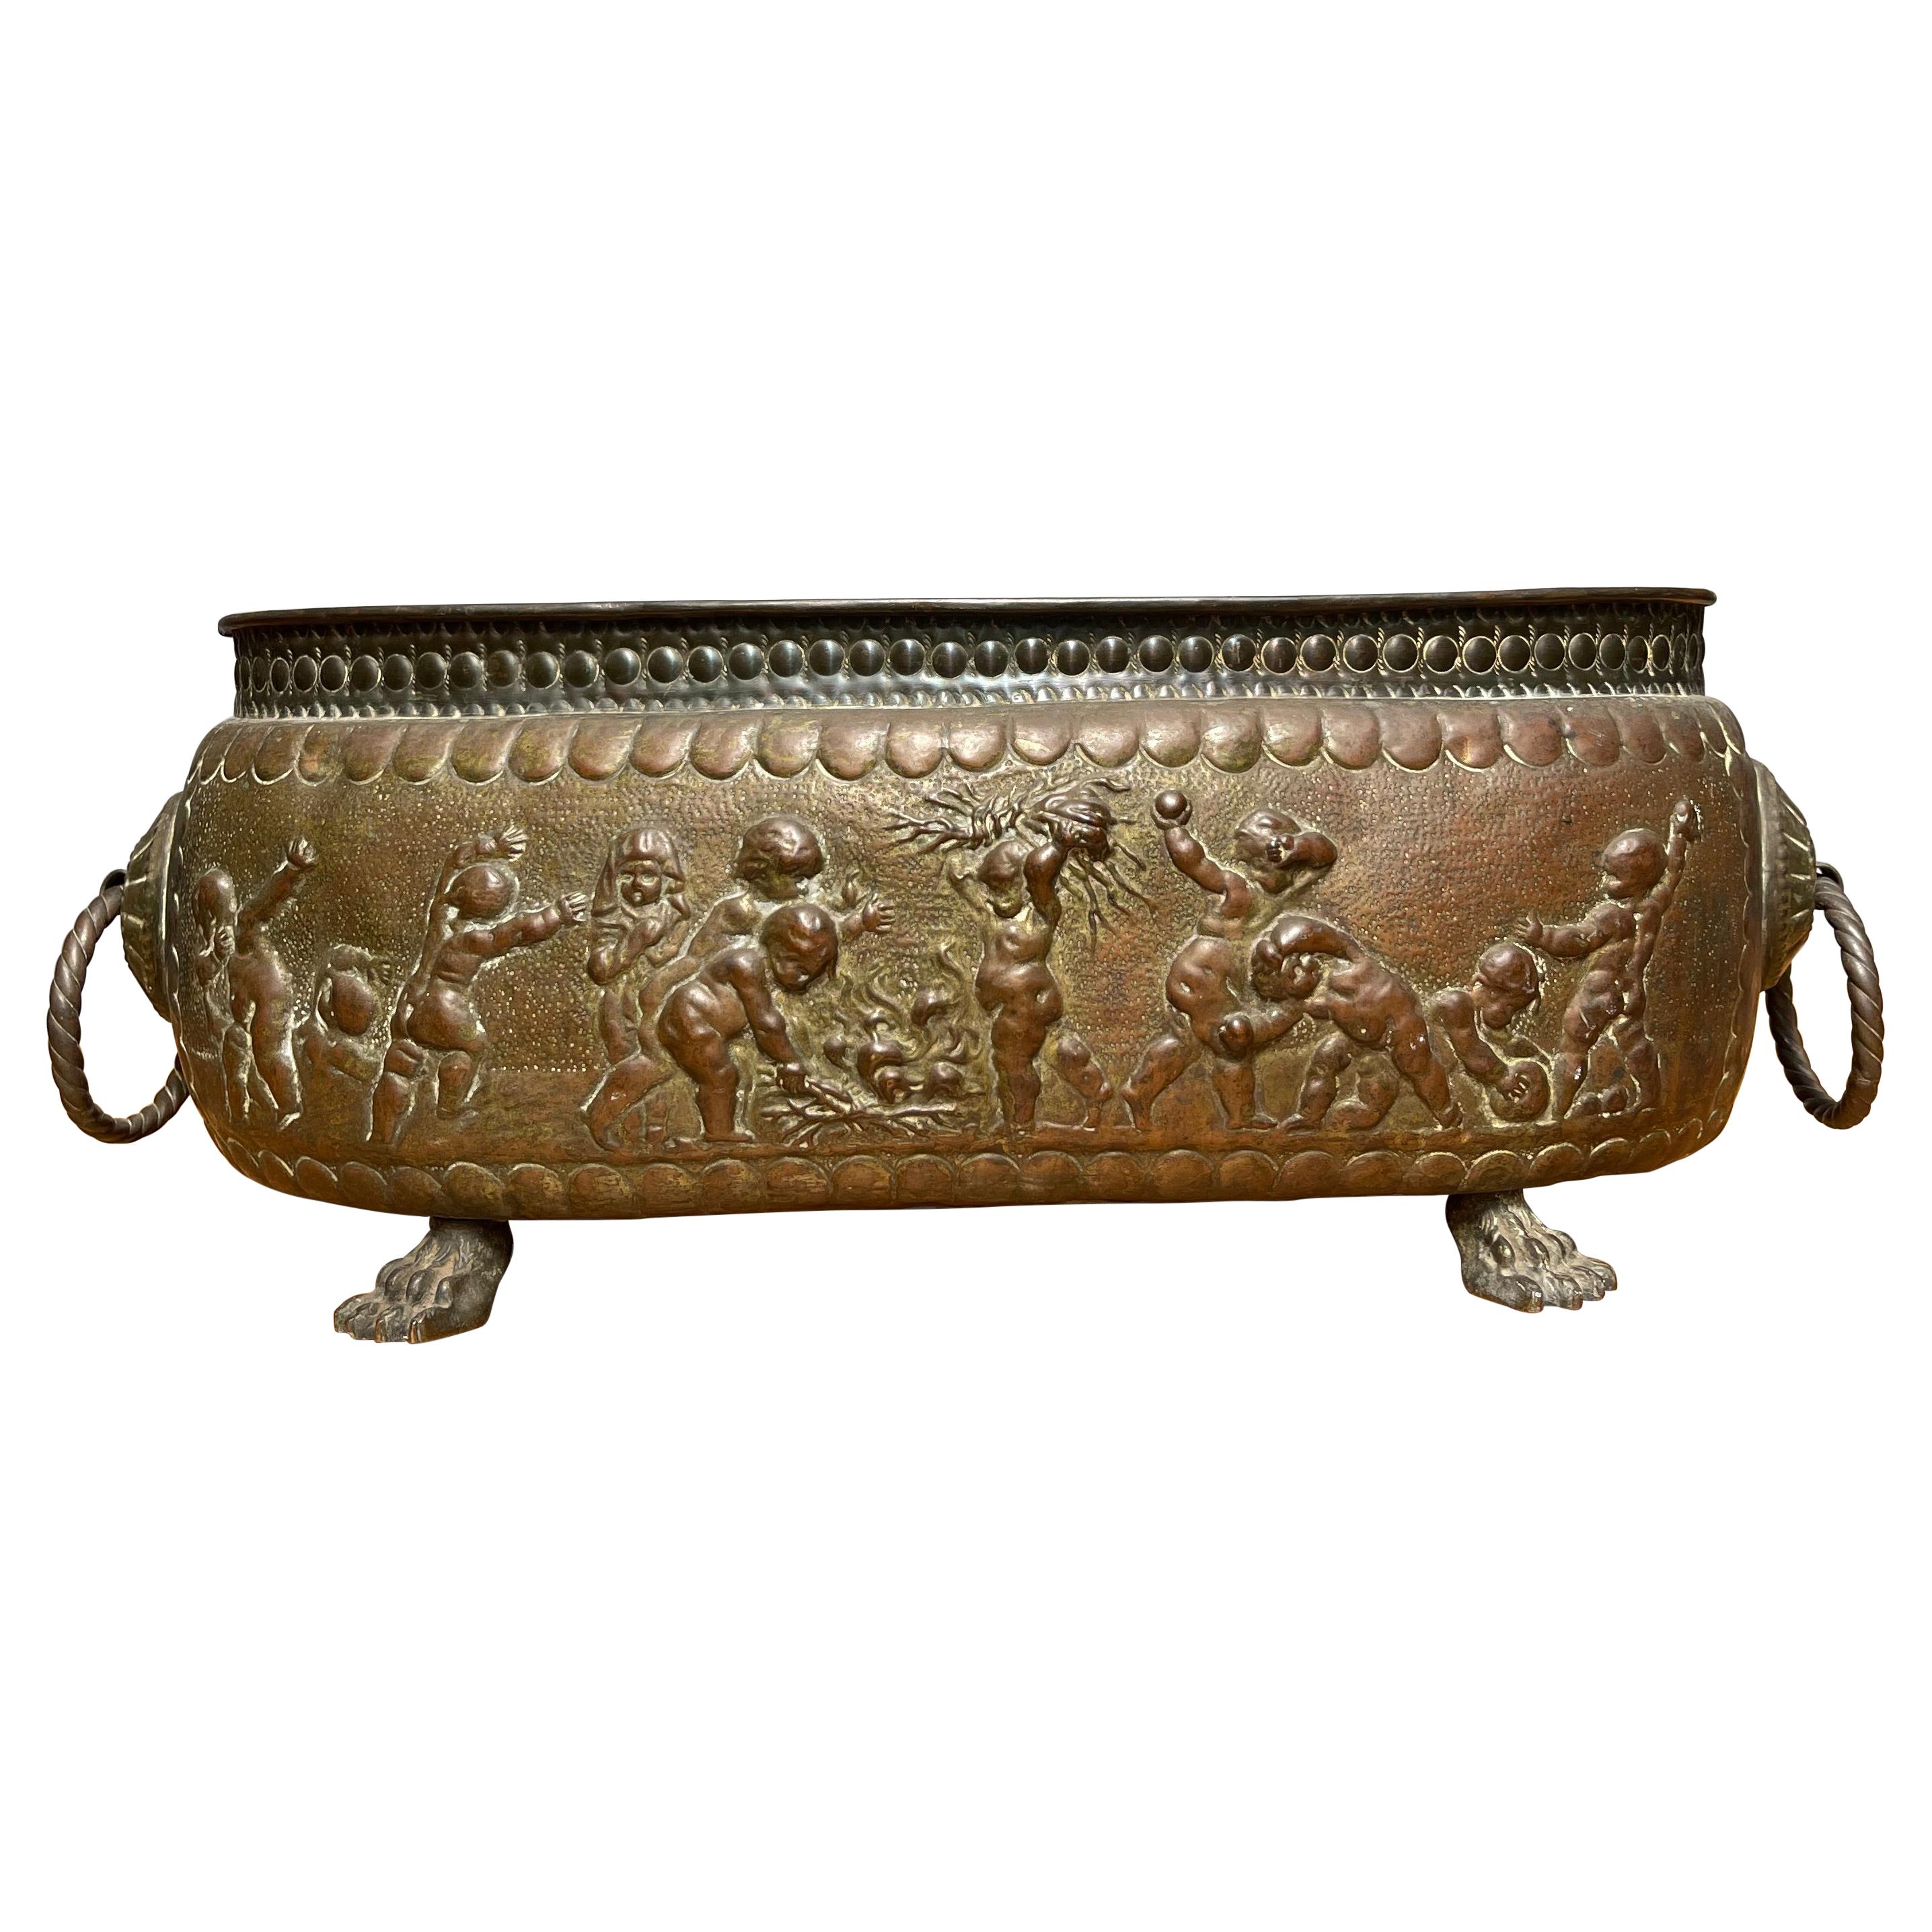 Antique Large Jardiniere / Planter Embossed with Putti Sculptures in Deep Relief